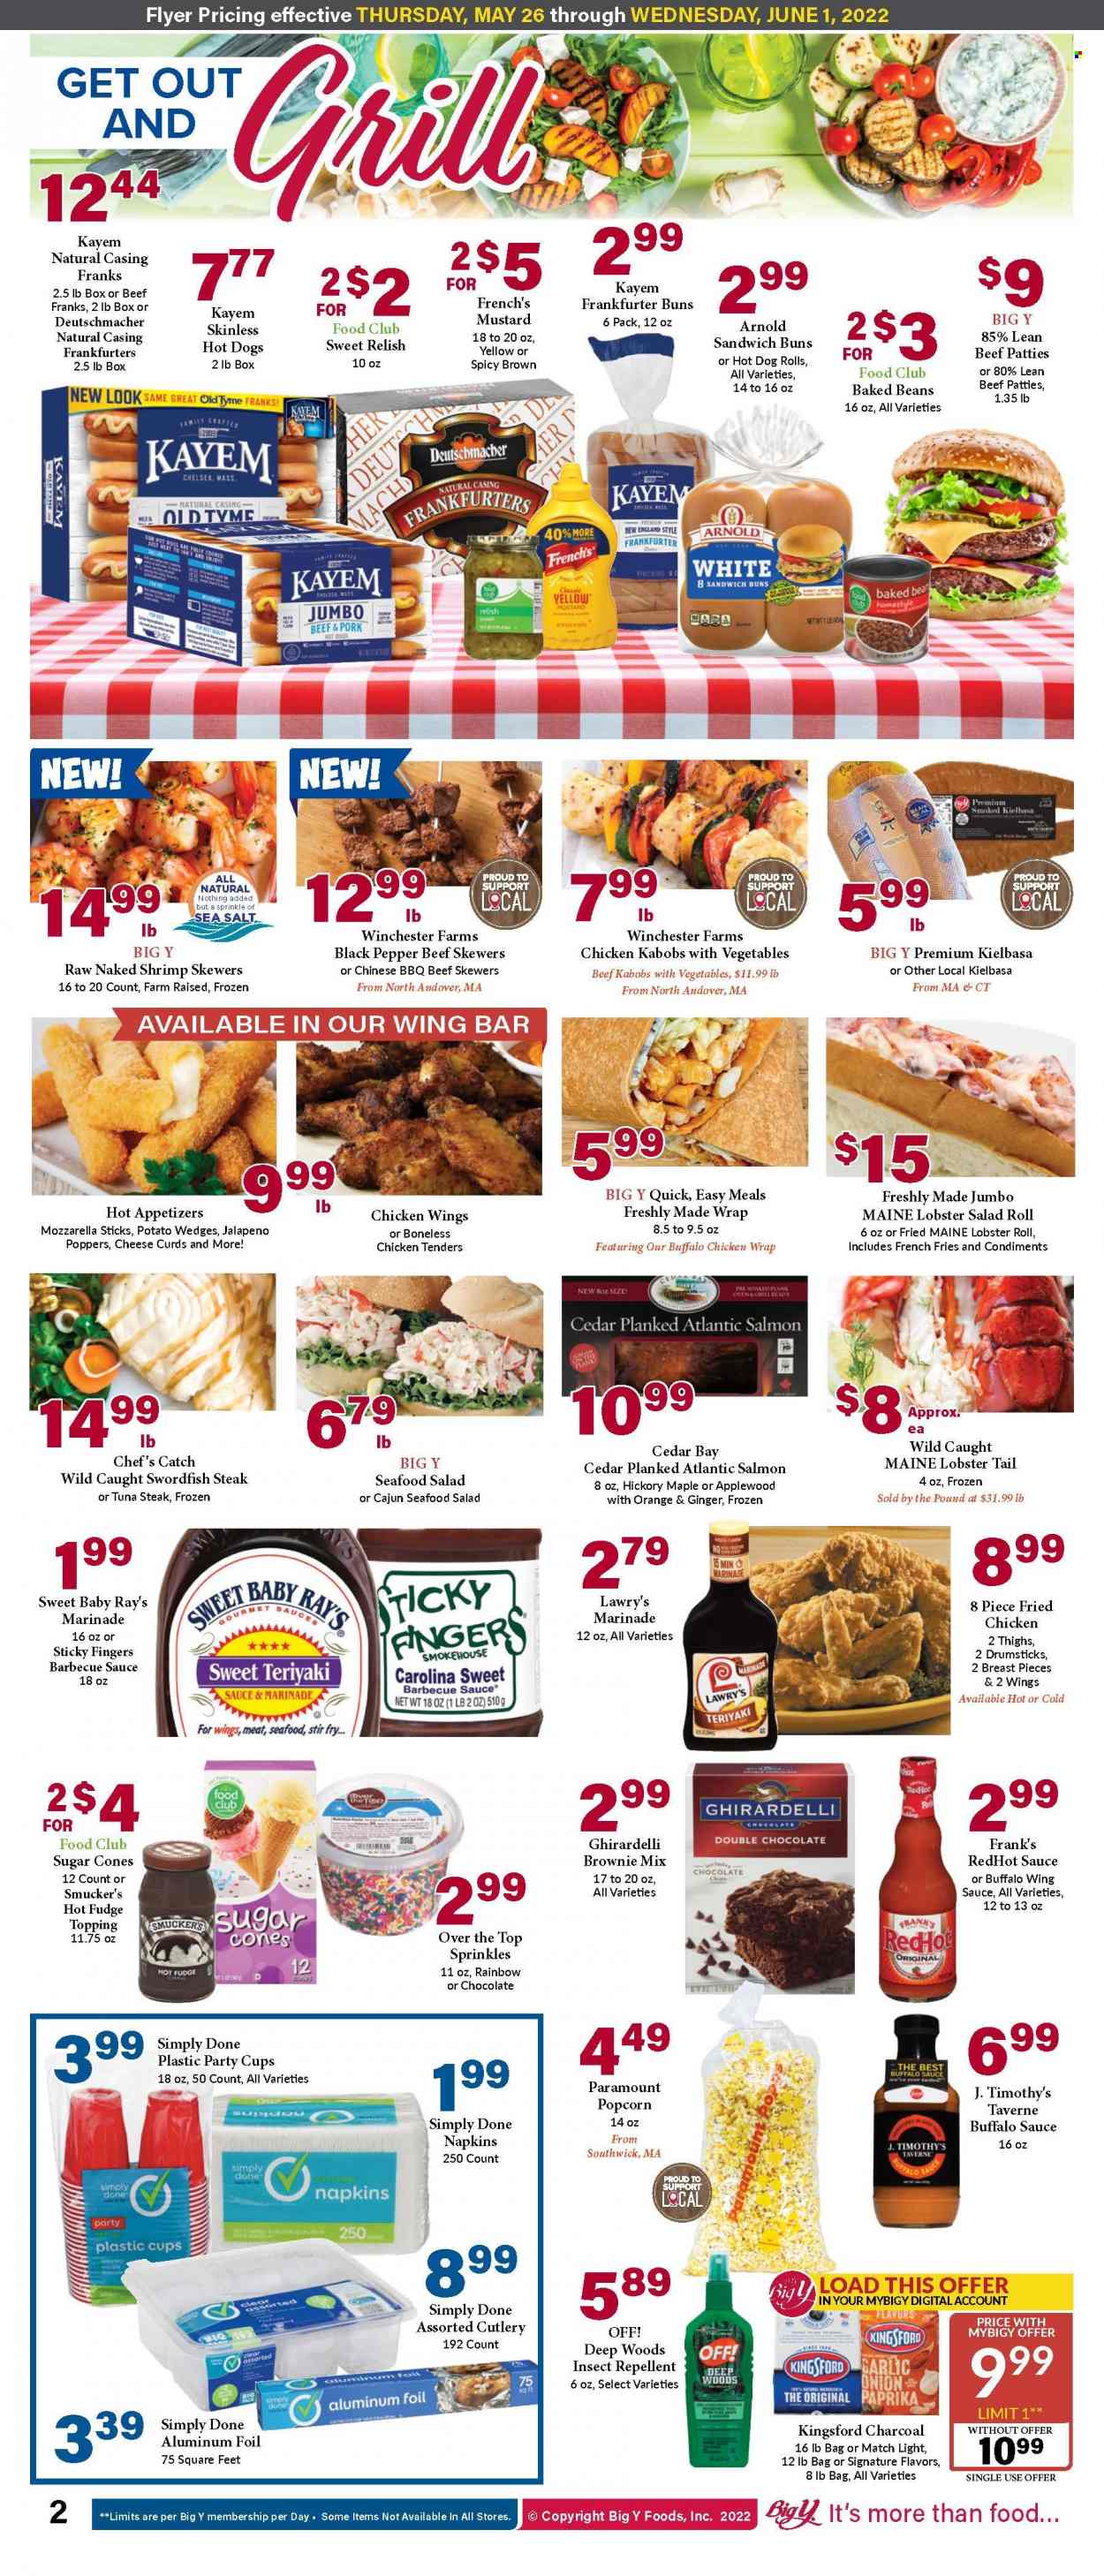 thumbnail - Big Y Flyer - 05/26/2022 - 06/01/2022 - Sales products - hot dog rolls, buns, brownie mix, beans, garlic, onion, jalapeño, oranges, lobster, salmon, swordfish, tuna, seafood, lobster tail, shrimps, chicken tenders, sandwich, fried chicken, chicken wrap, sausage, kielbasa, seafood salad, mozzarella, cheese, cheese curd, chicken wings, potato fries, potato wedges, french fries, chocolate chips, Ghirardelli, popcorn, sugar, topping, sea salt, tuna steak, baked beans, black pepper, BBQ sauce, mustard, marinade, teriyaki sauce, wing sauce, beef meat, steak. Page 2.